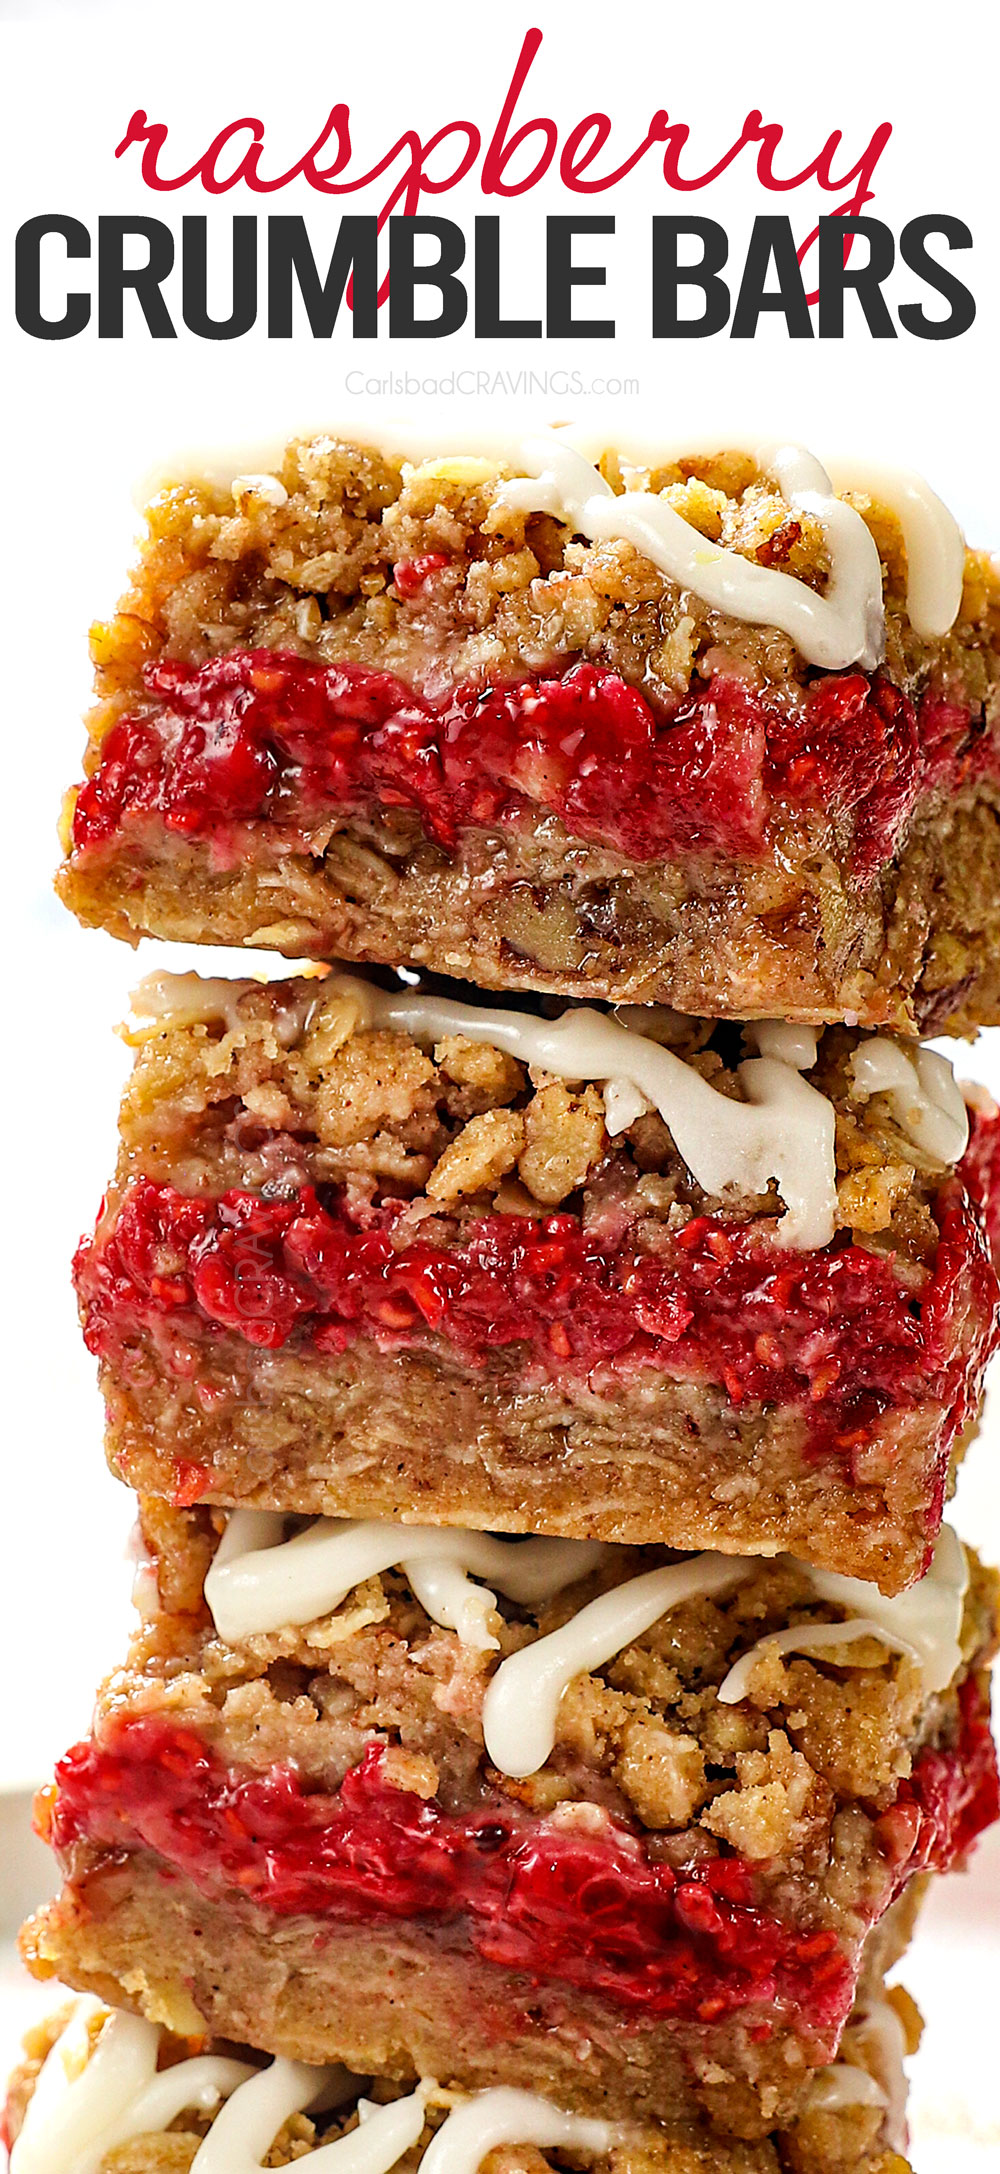 up close or raspberry crumble bars with oats, pecans and fresh raspberries